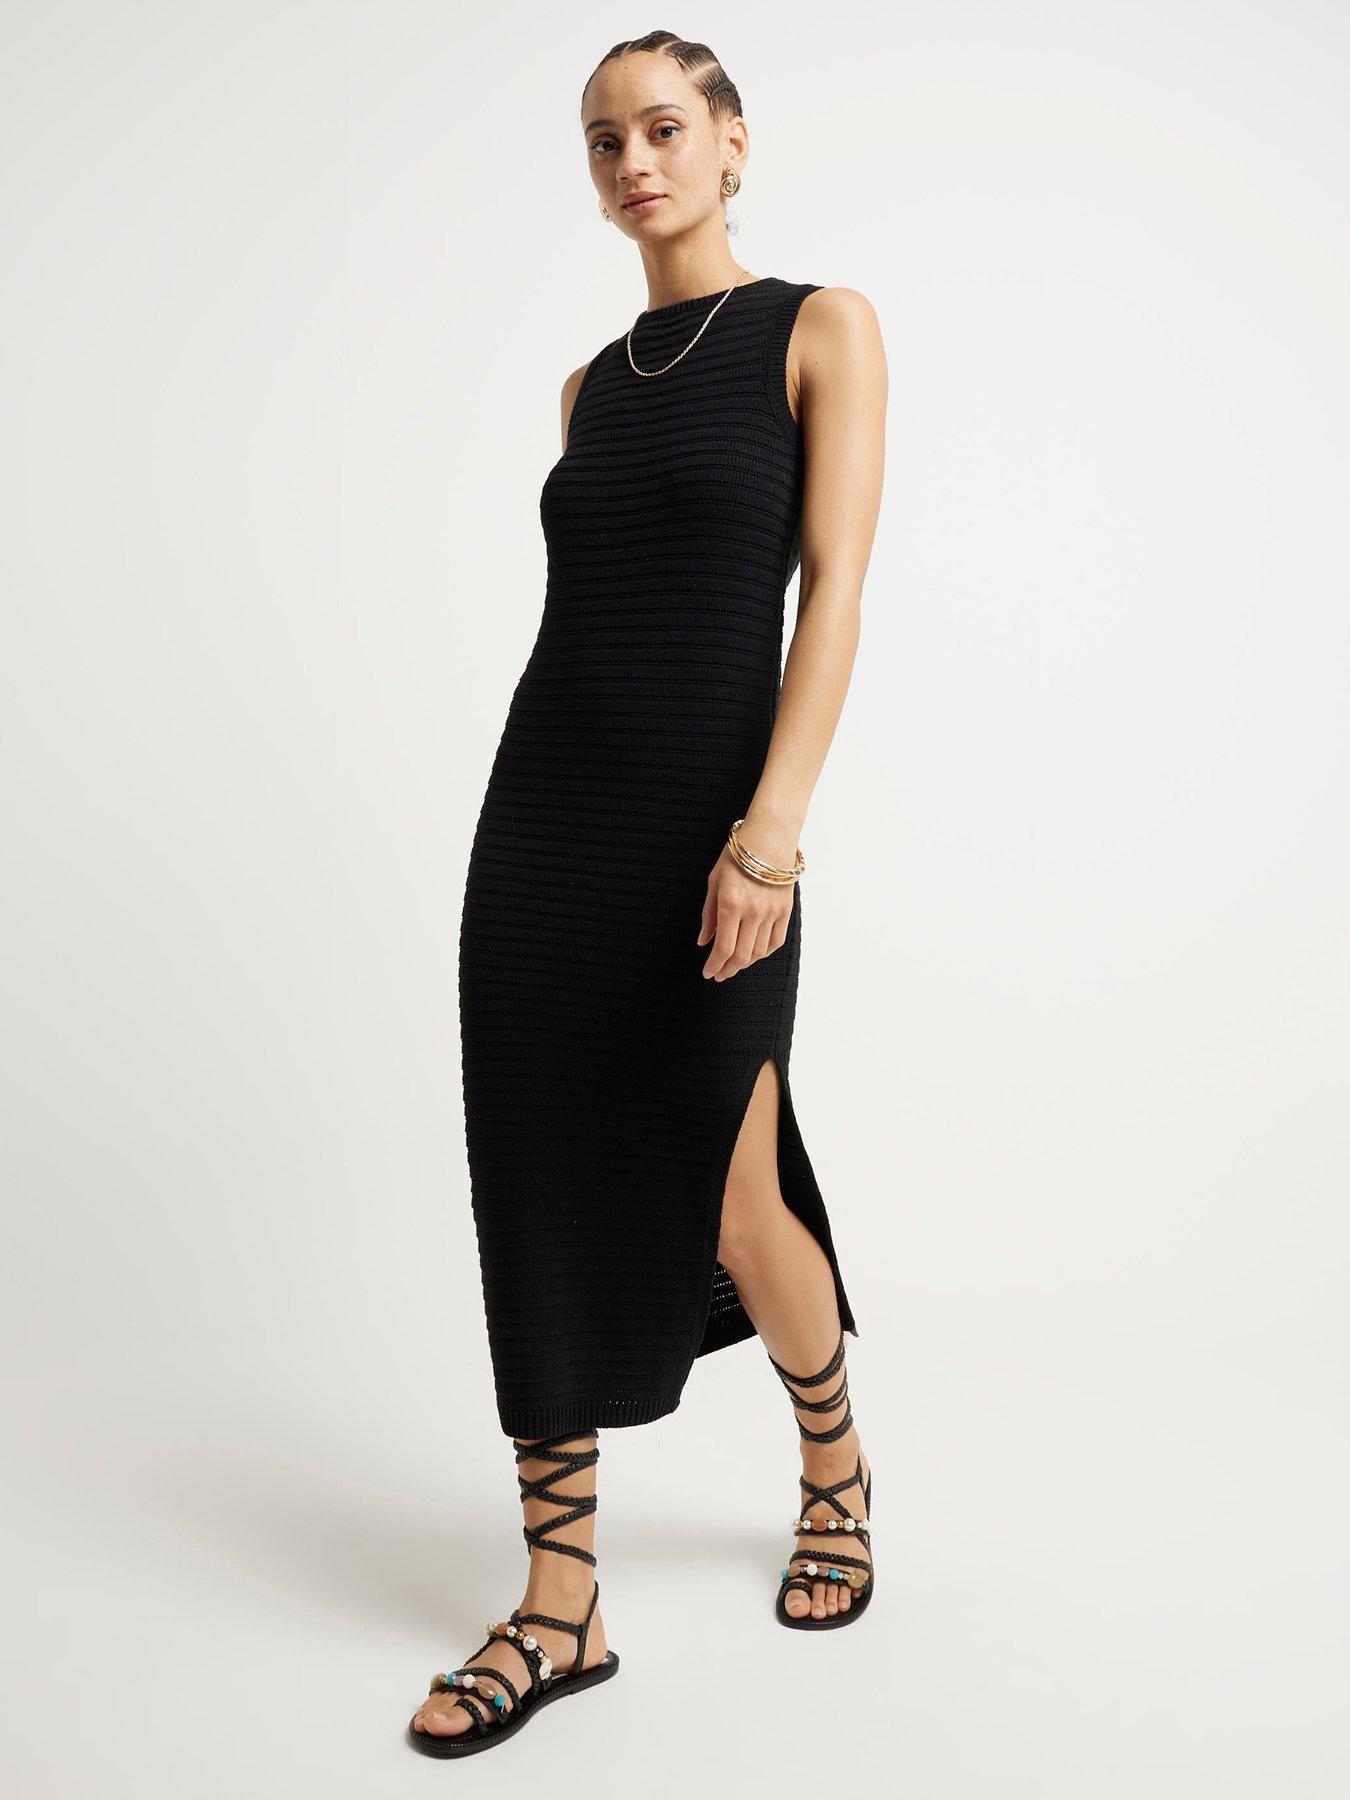 Knotted Stretch Wool Dress: Women's Clothing, Dresses